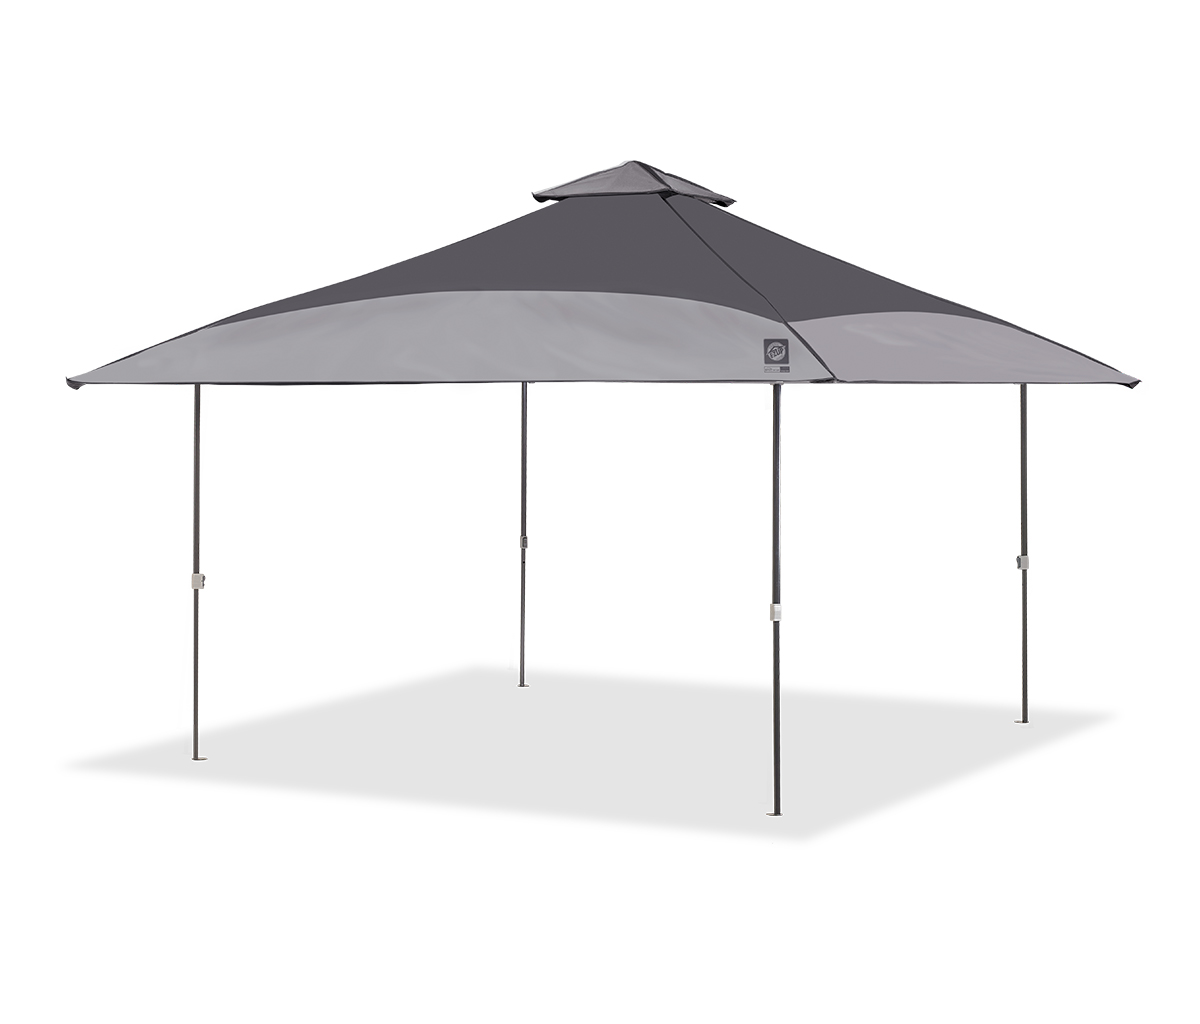 E-Z Up Spectator Instant Shelter Outdoor Canopy, 13 ft x 13 ft, Steel Gray/Cool Gray Top w/ Steel Gray Frame - image 2 of 8